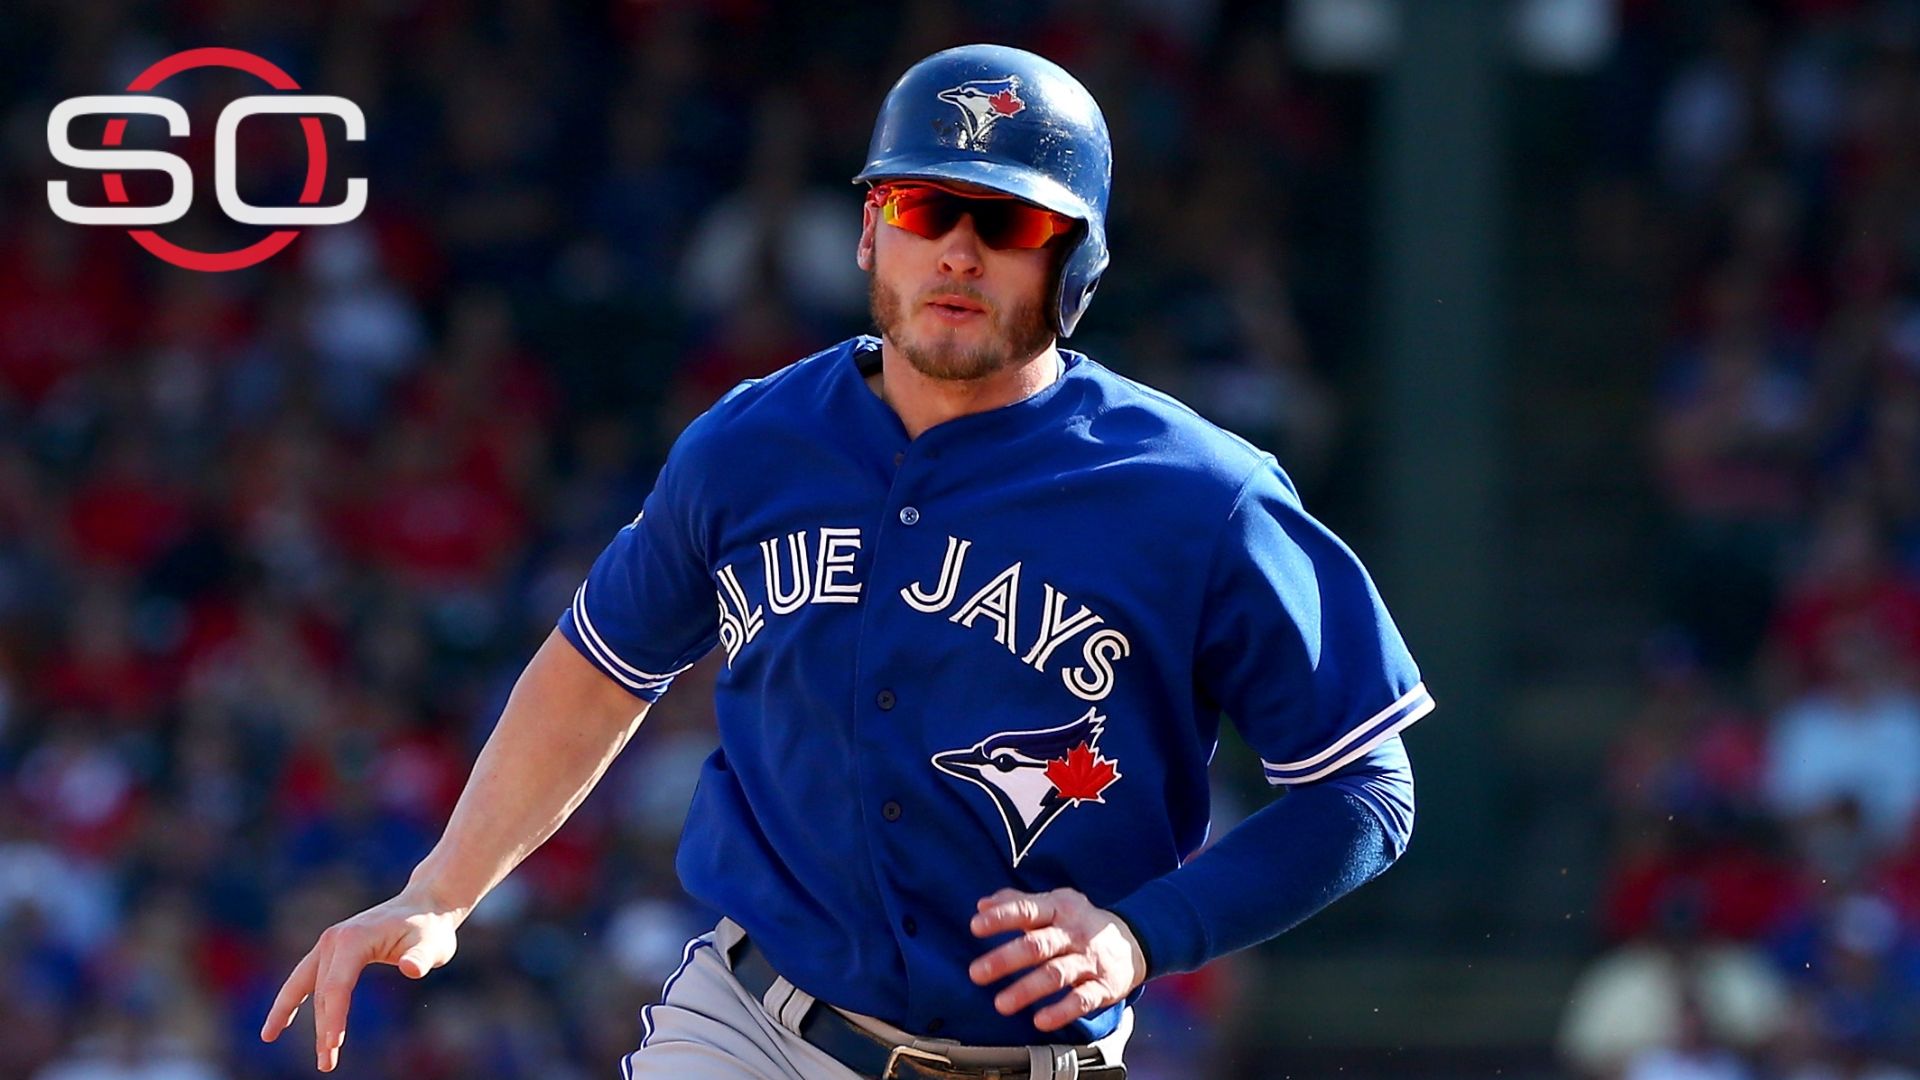 Report: Josh Donaldson, Jays agree to 2-year, $29M contract - ABC7